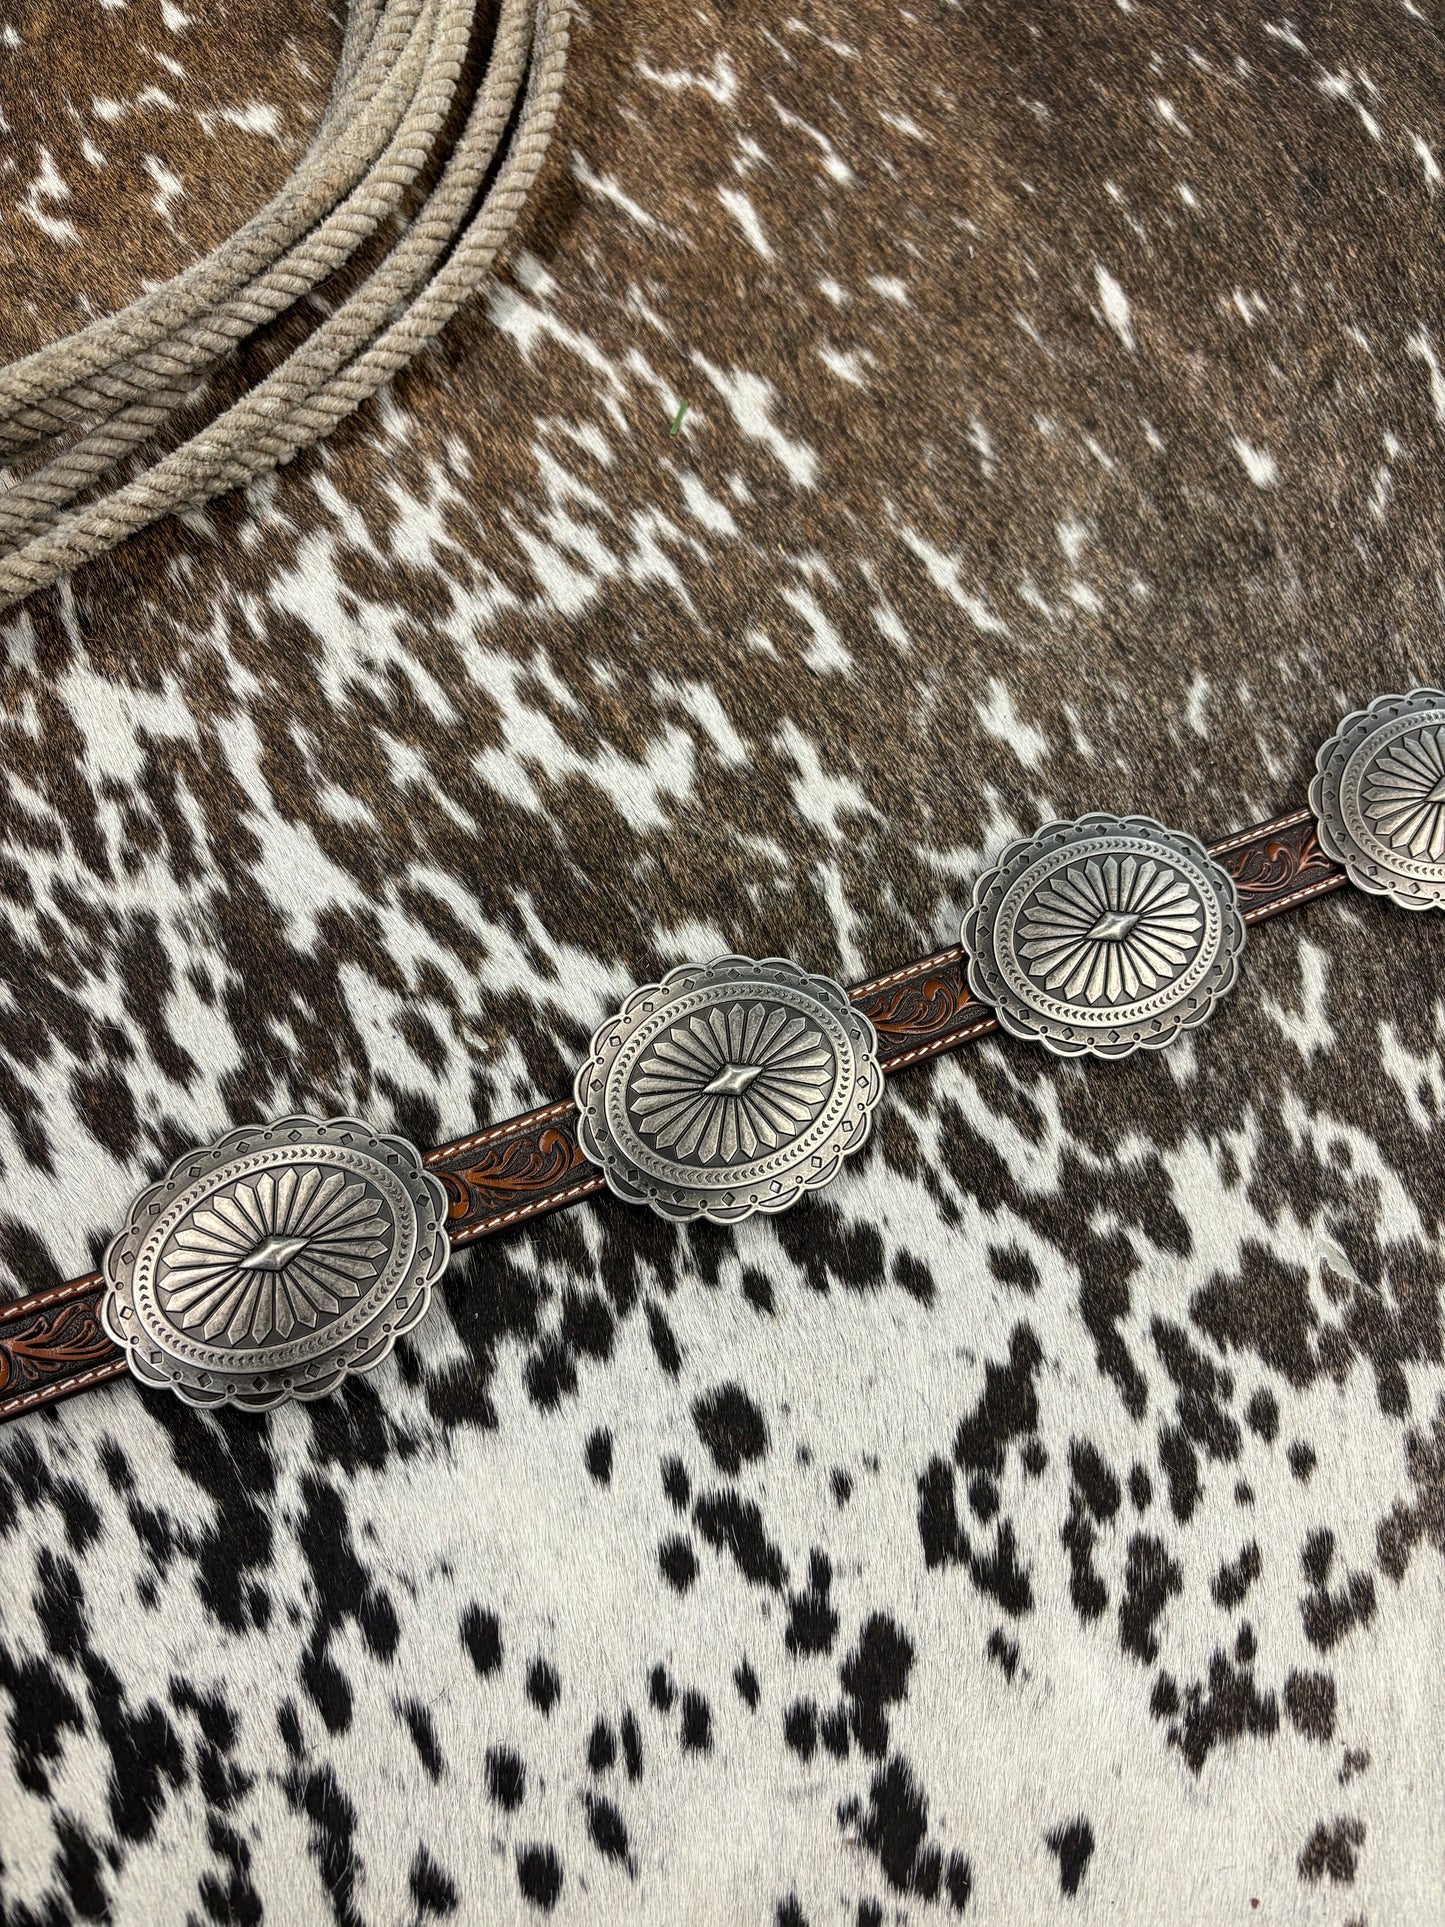 The Ariat Oval Tooled Concho Belt